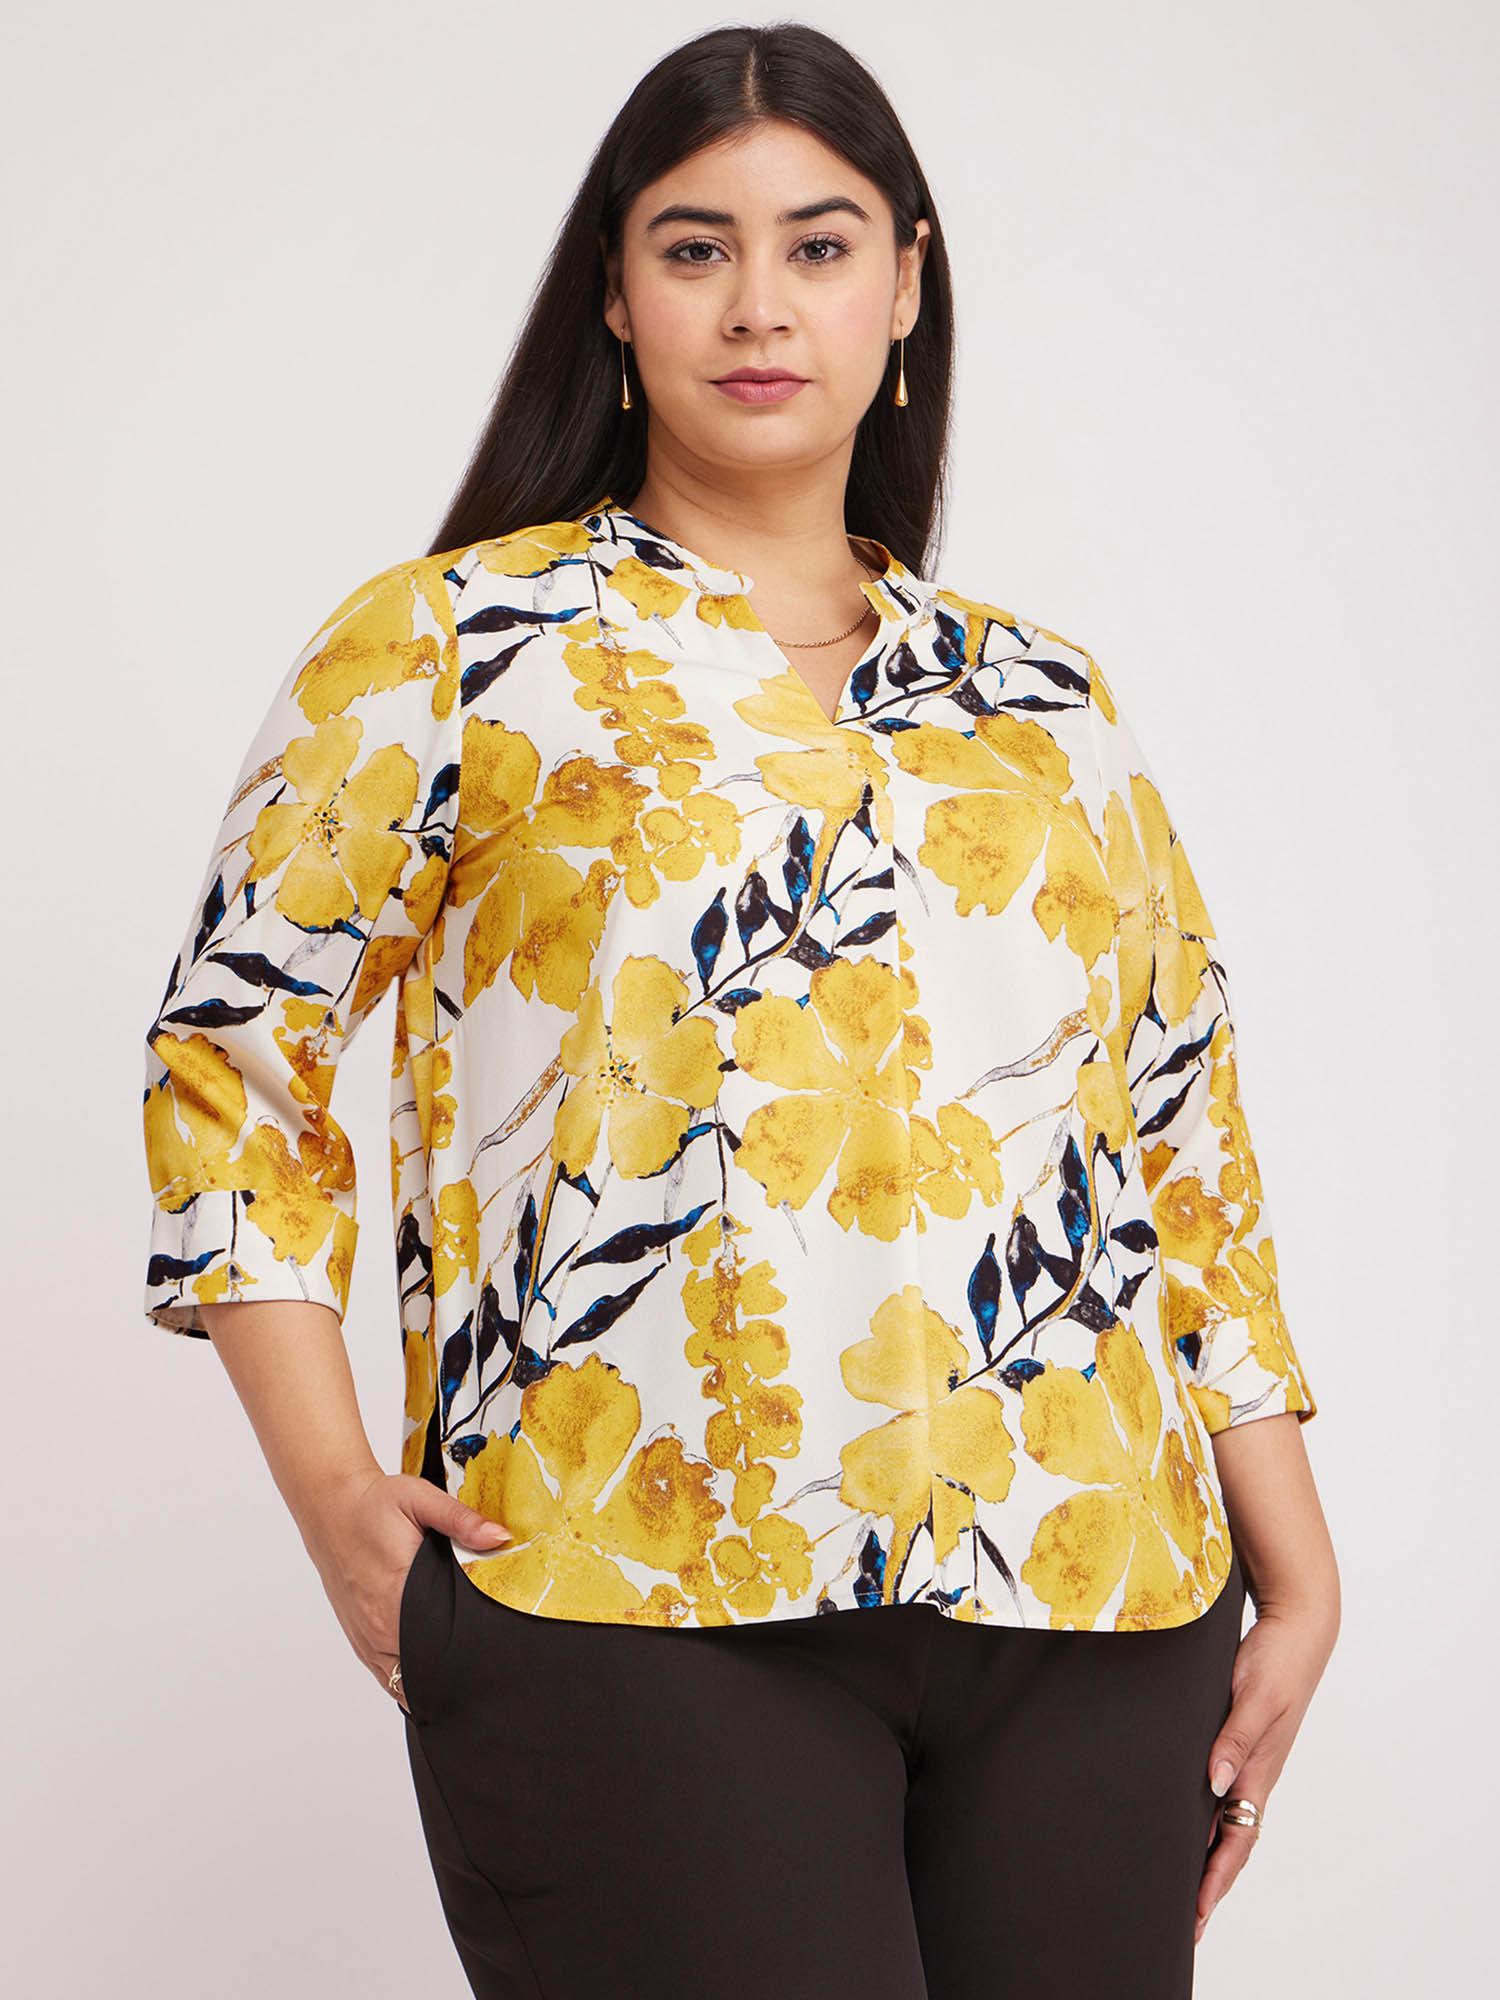 x plus size floral print top - yellow and white